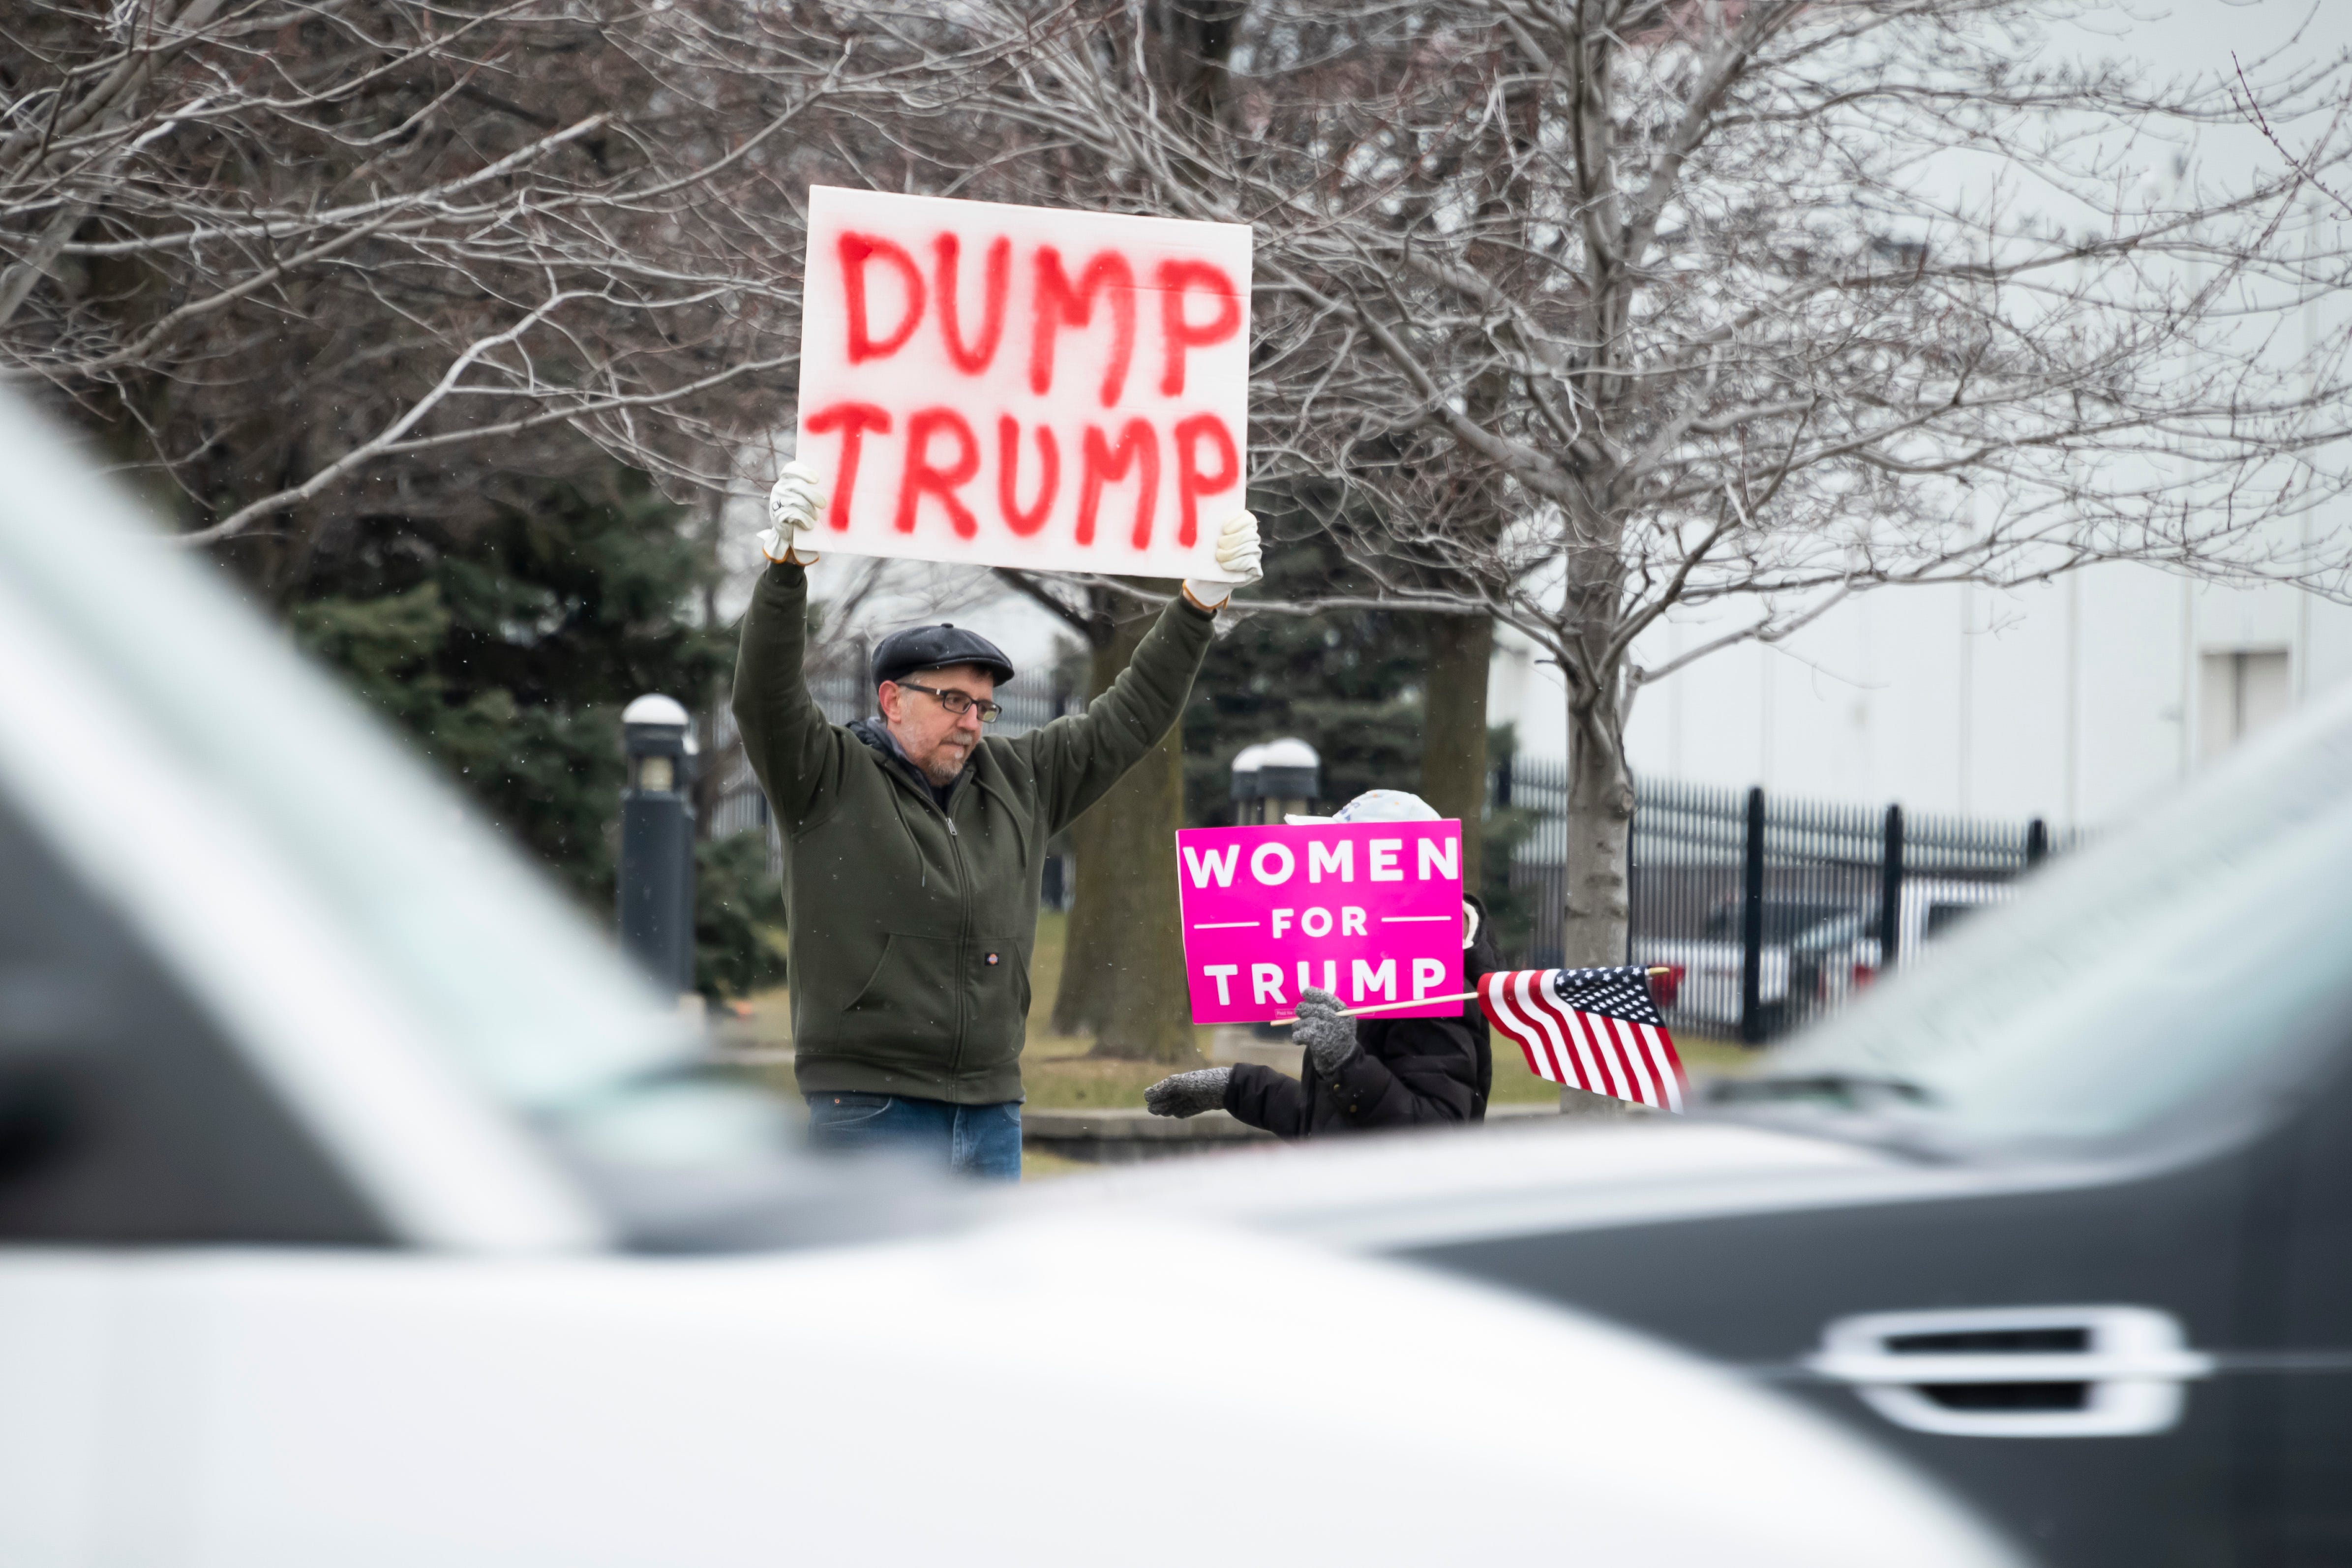 Ken Planet of Sterling Heights and Tammie Schwartz of Macomb Township display opposing viewpoints while awaiting the arrival of  President Donald Trump along Van Dyke.